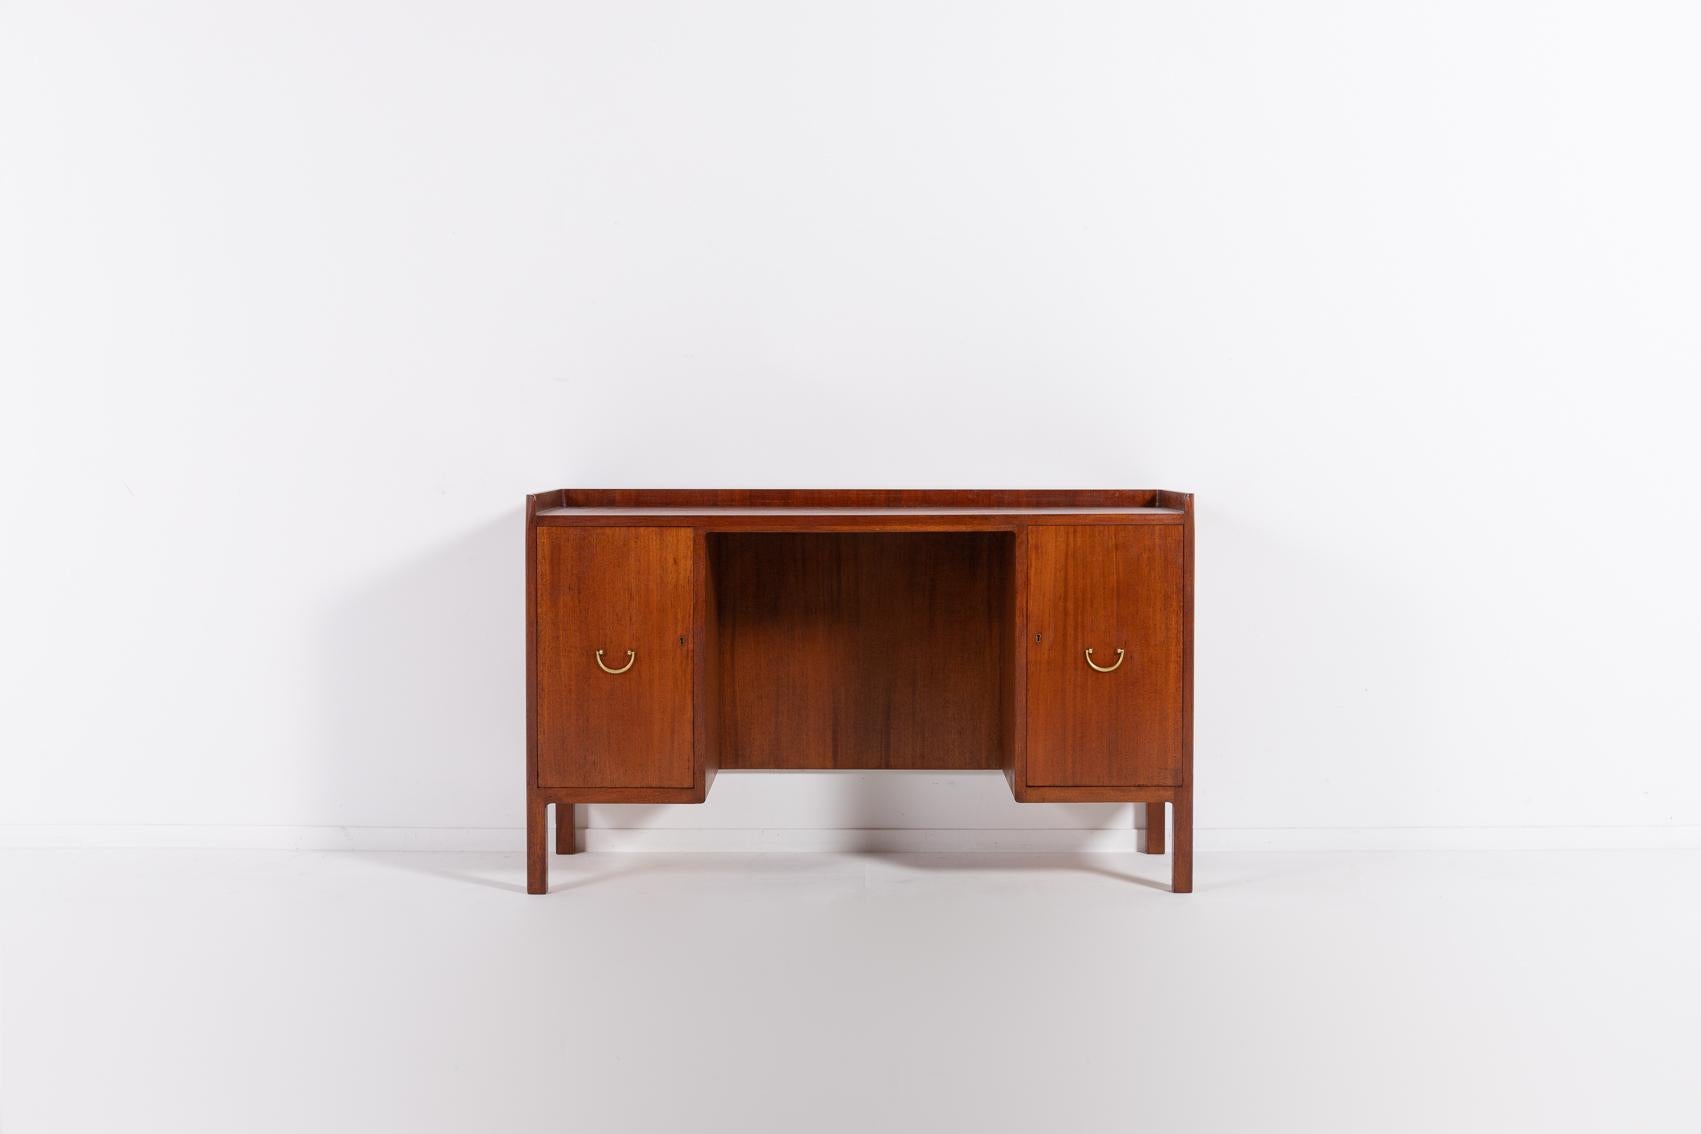 Spectacular free standing vanity designed by Swedish architecture and design icon Josef Frank. Exceptional Scandinavian craftsmanship in varnished teak and mahogany, pull-out foldable doors with brass handles.

Condition
Restored

Dimensions
height: